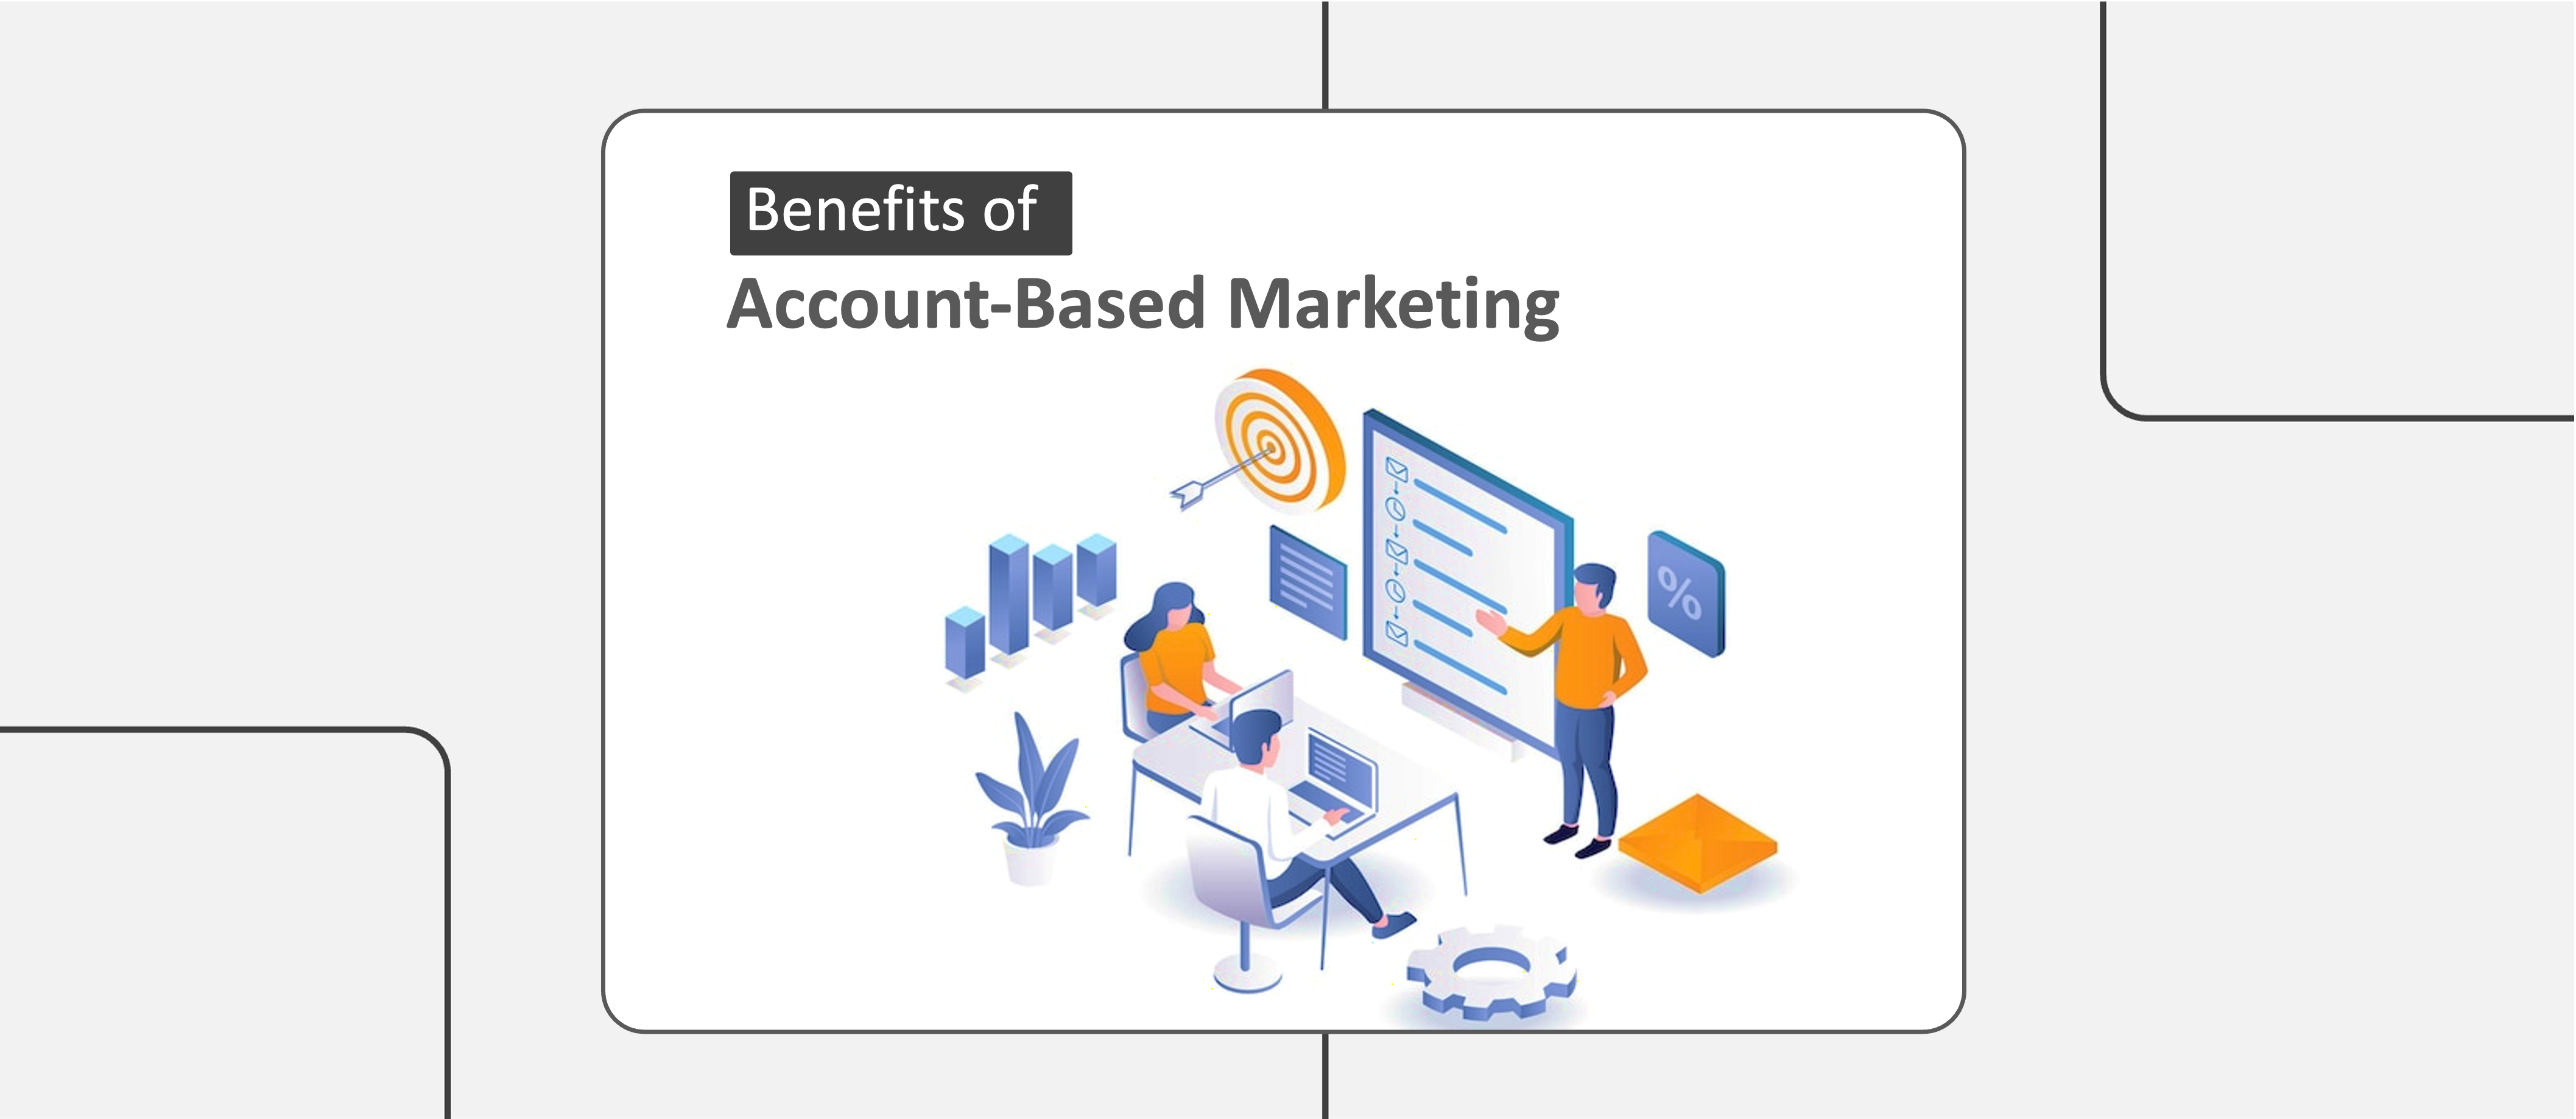 10 Account-Based Marketing Benefits That Truly Profit Your Company